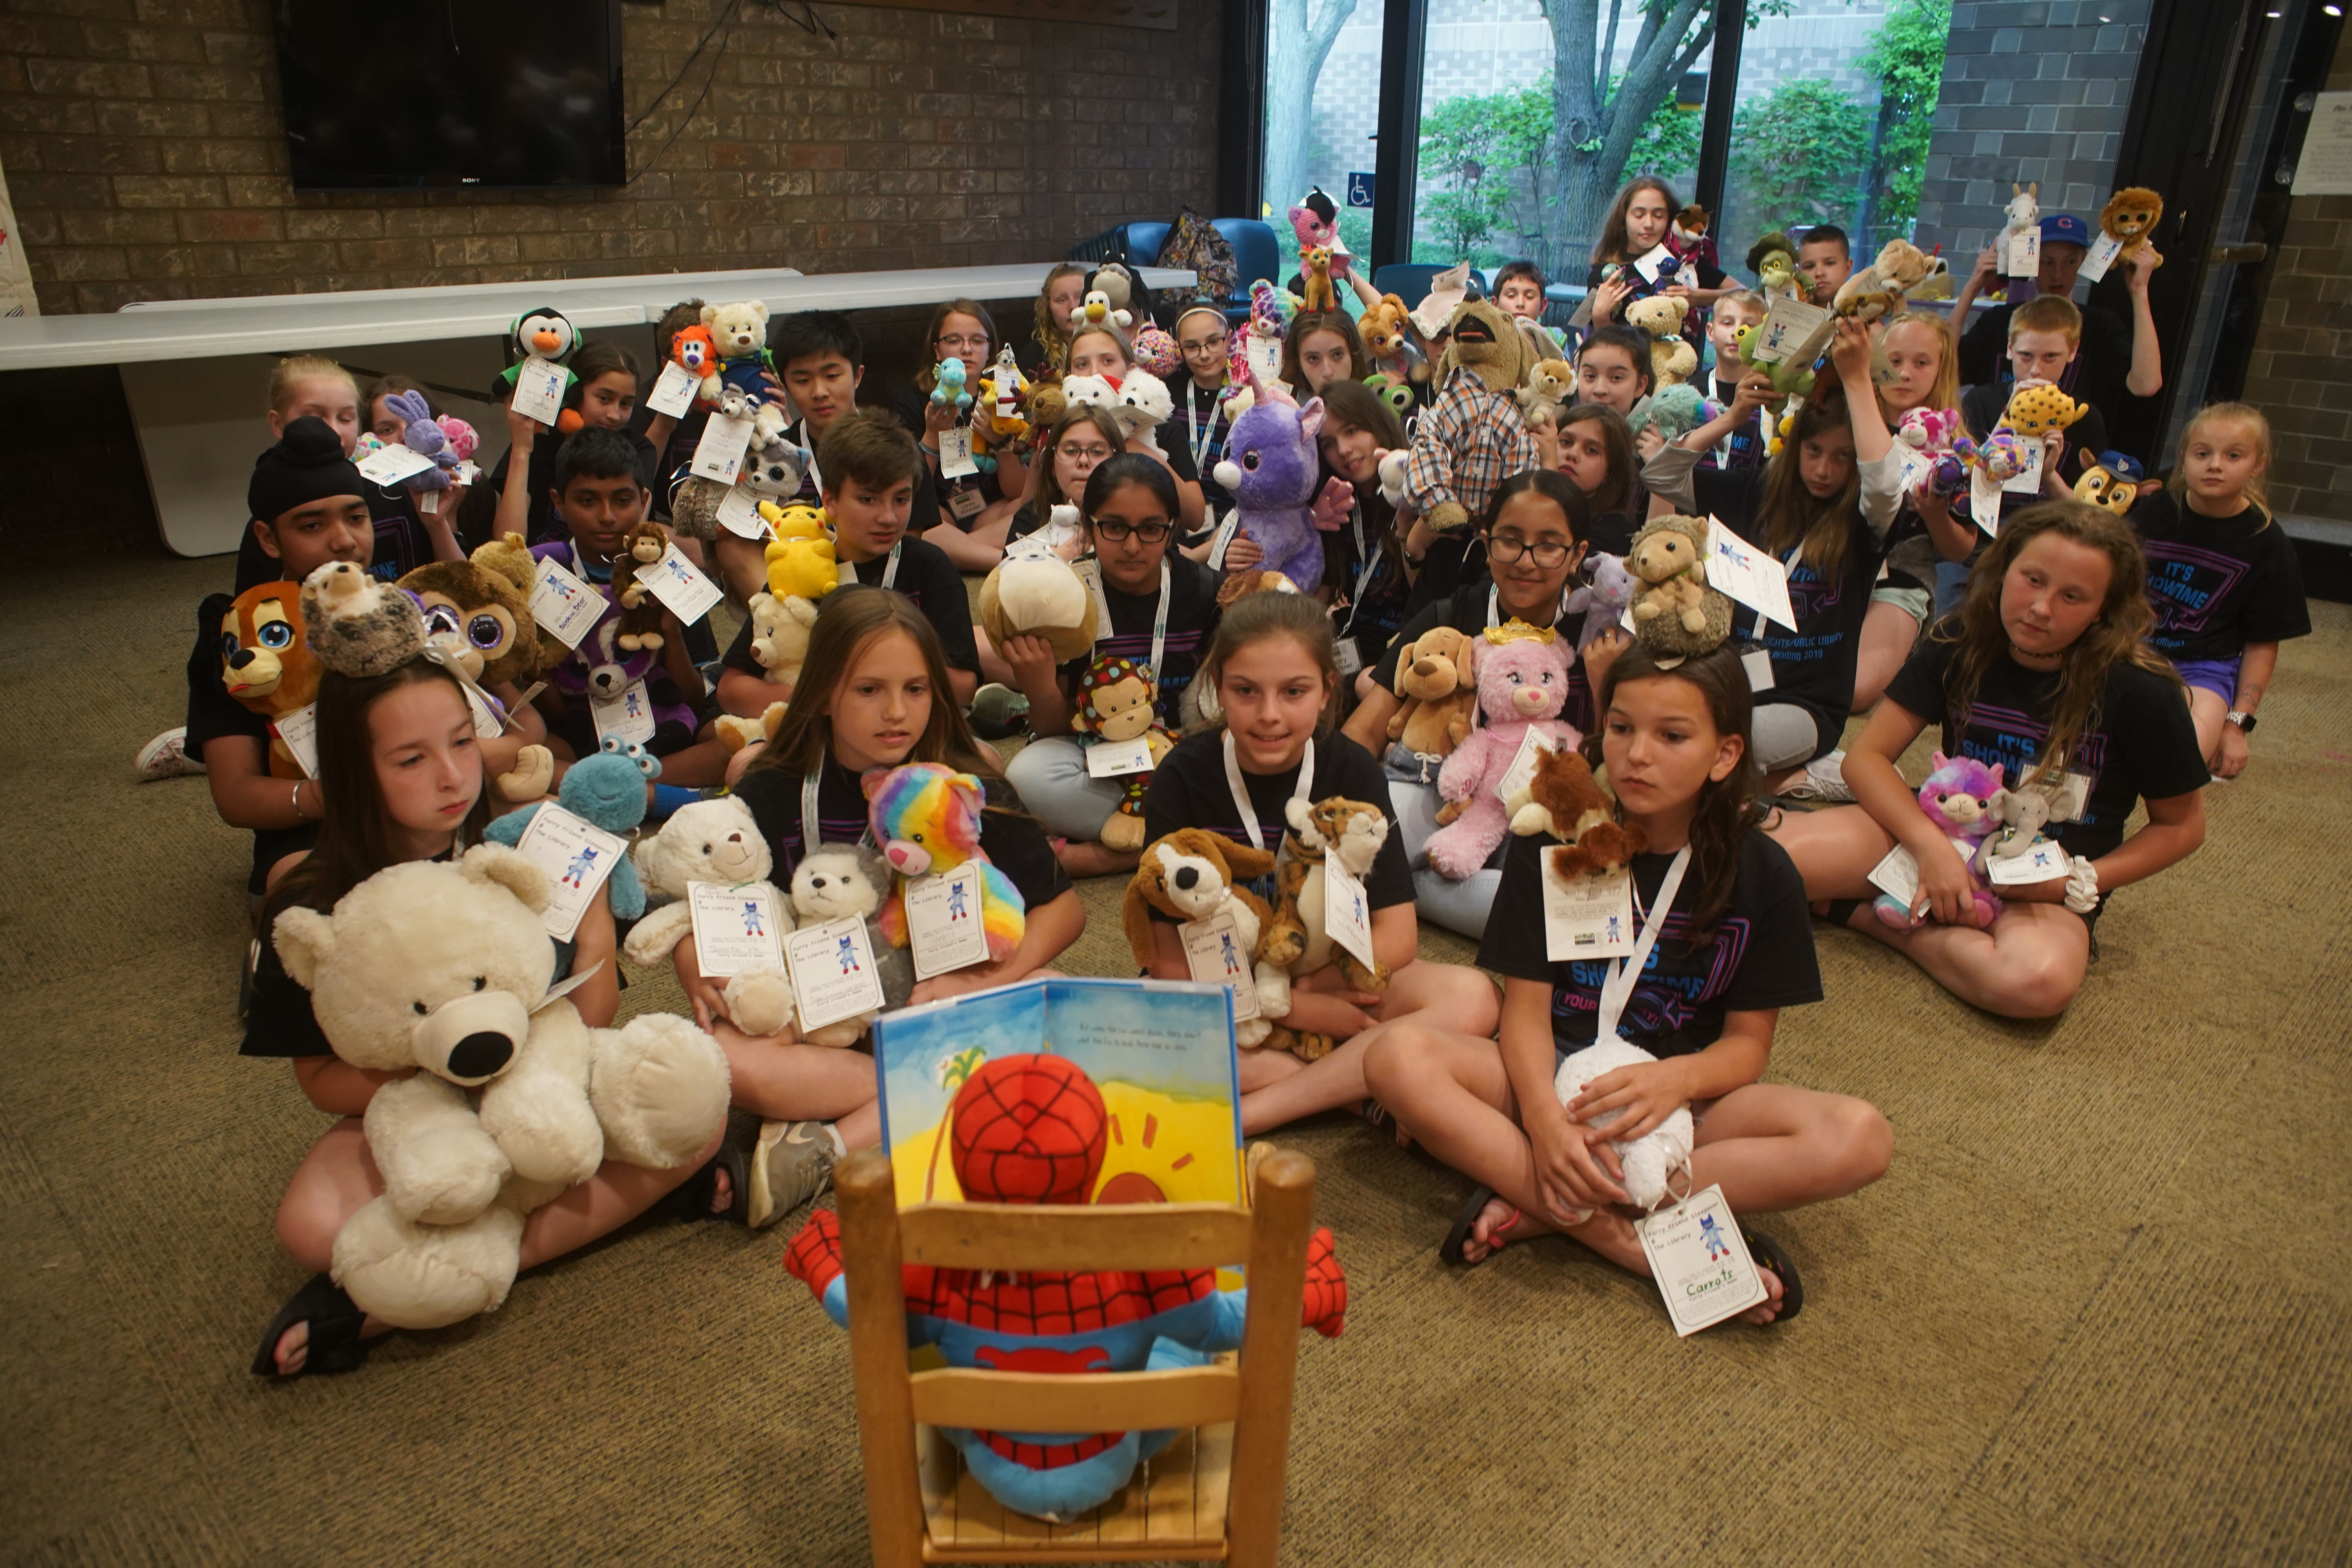 A large group of children at the Furry Friend Sleepover event